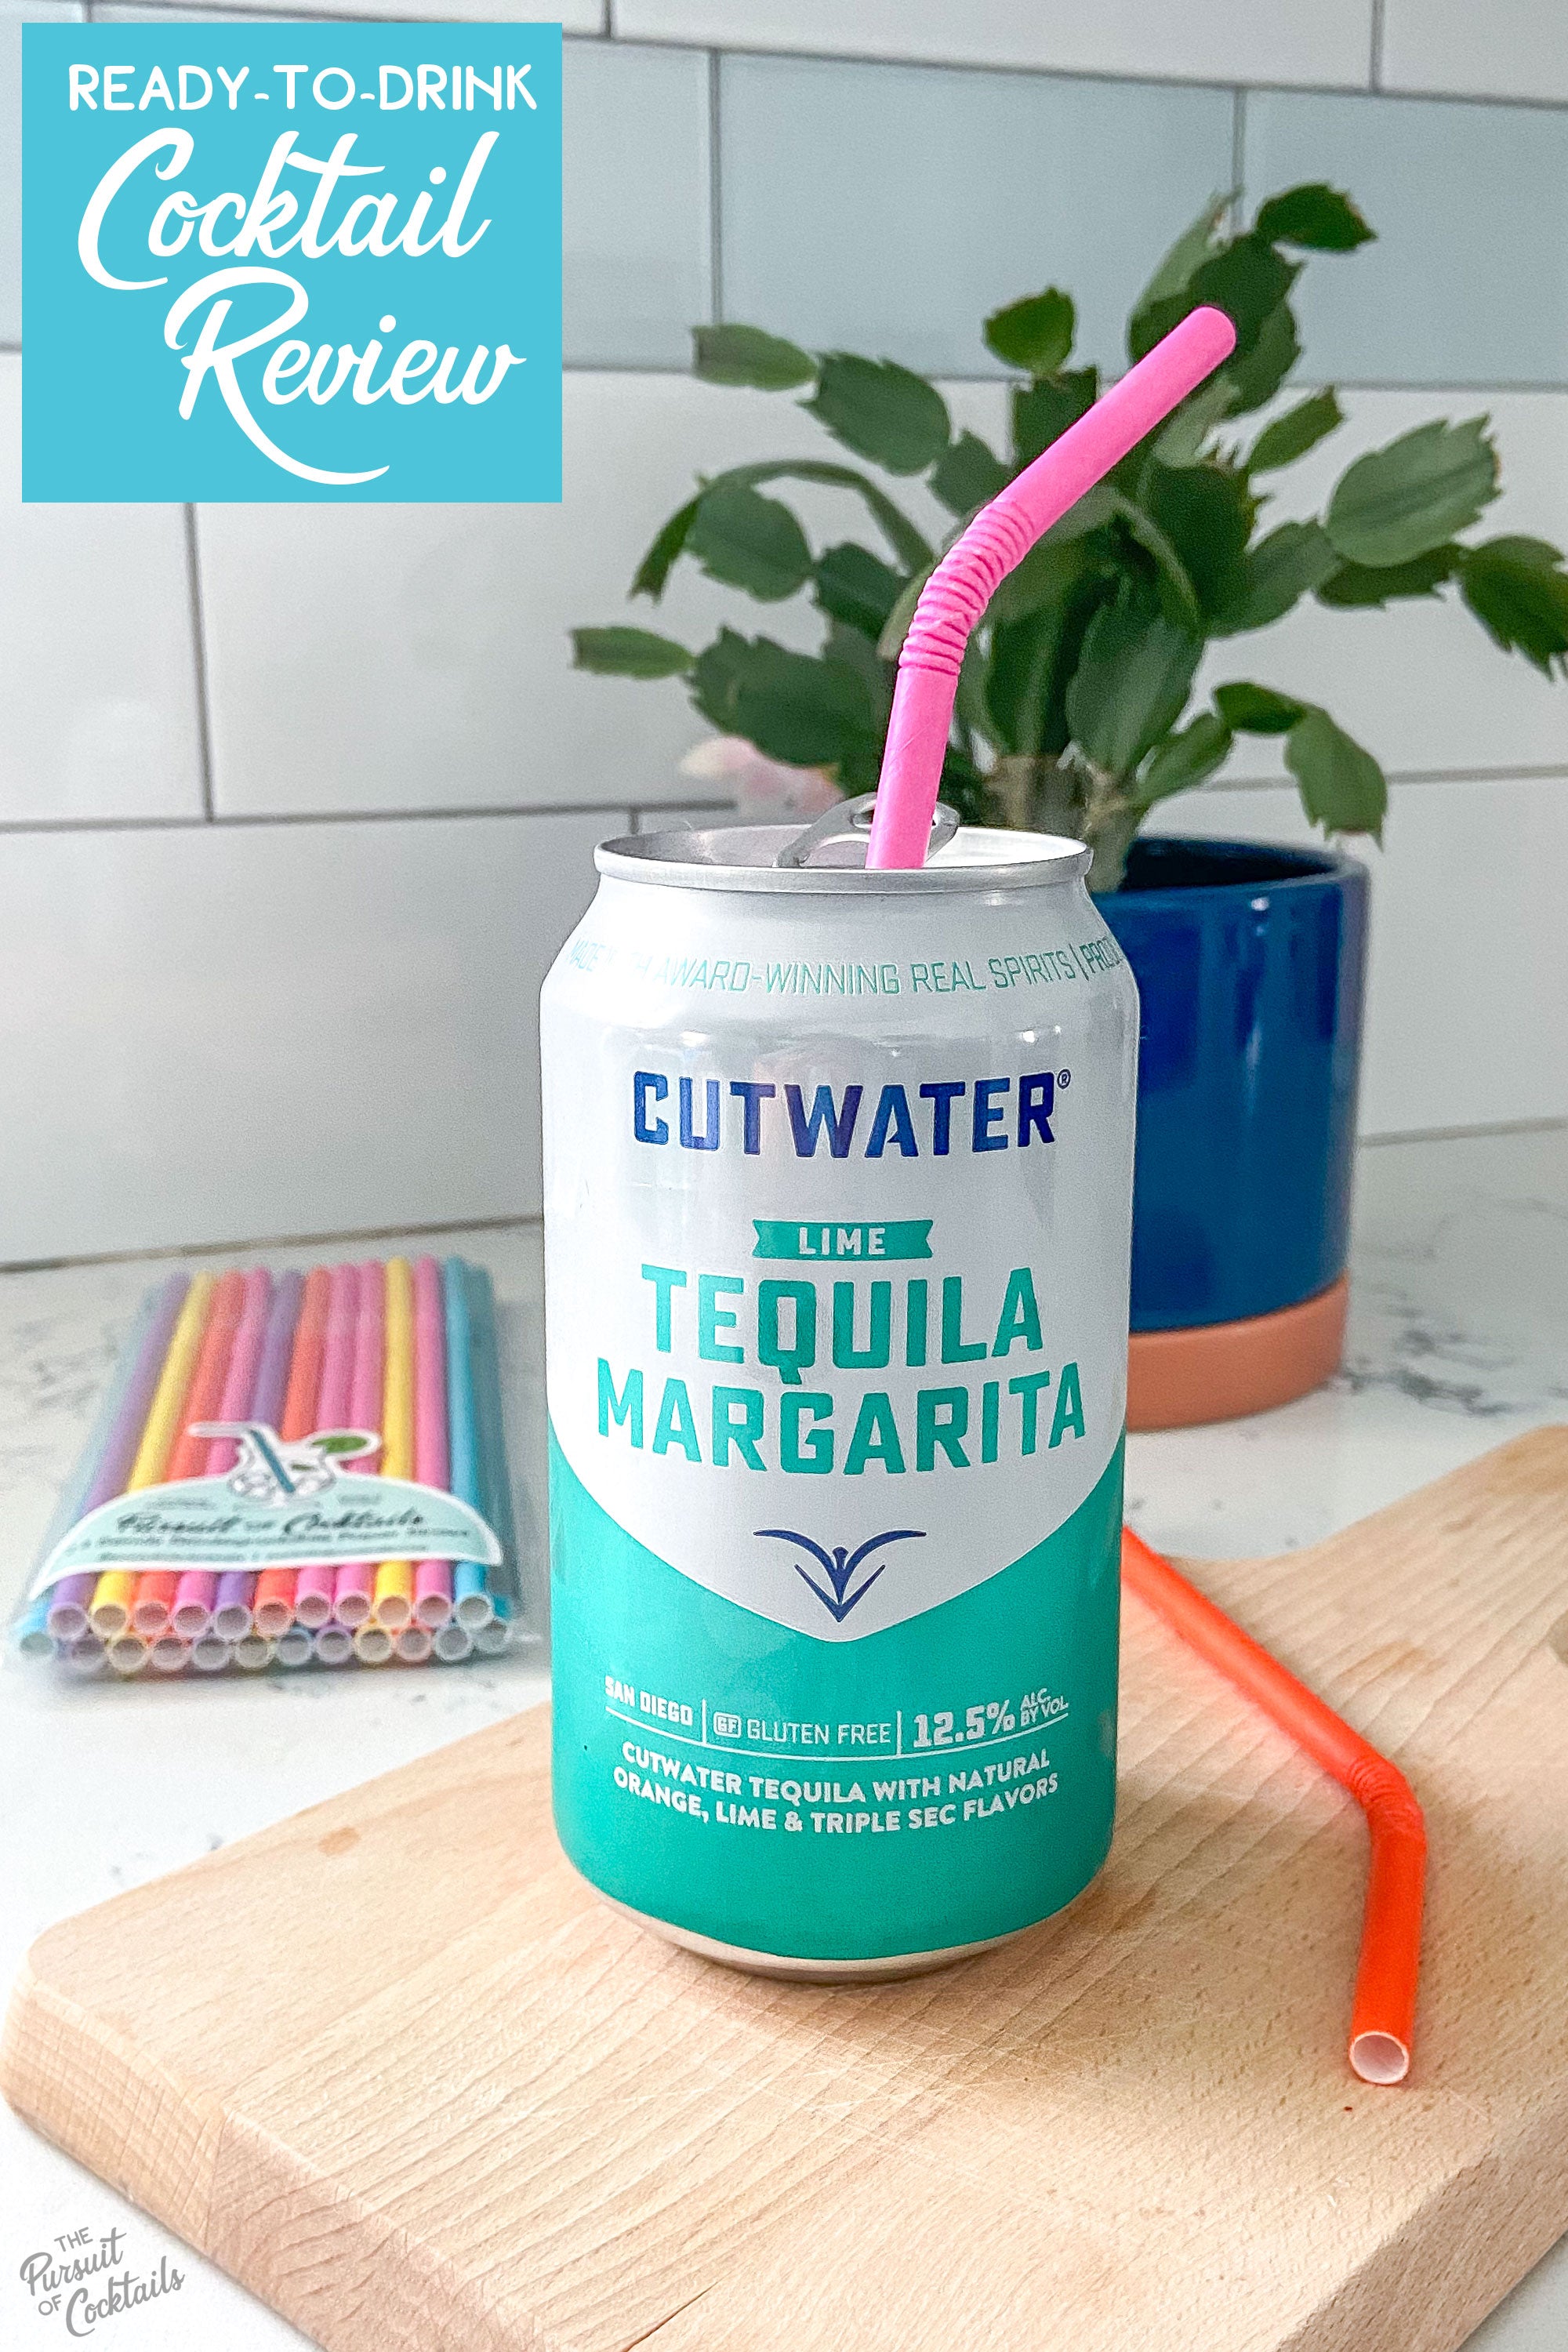 https://cdn.shopify.com/s/files/1/0251/4949/files/Cutwater-margarita-canned-cocktail-review-by-The-Pursuit-of-Cocktails.jpg?v=1648833009